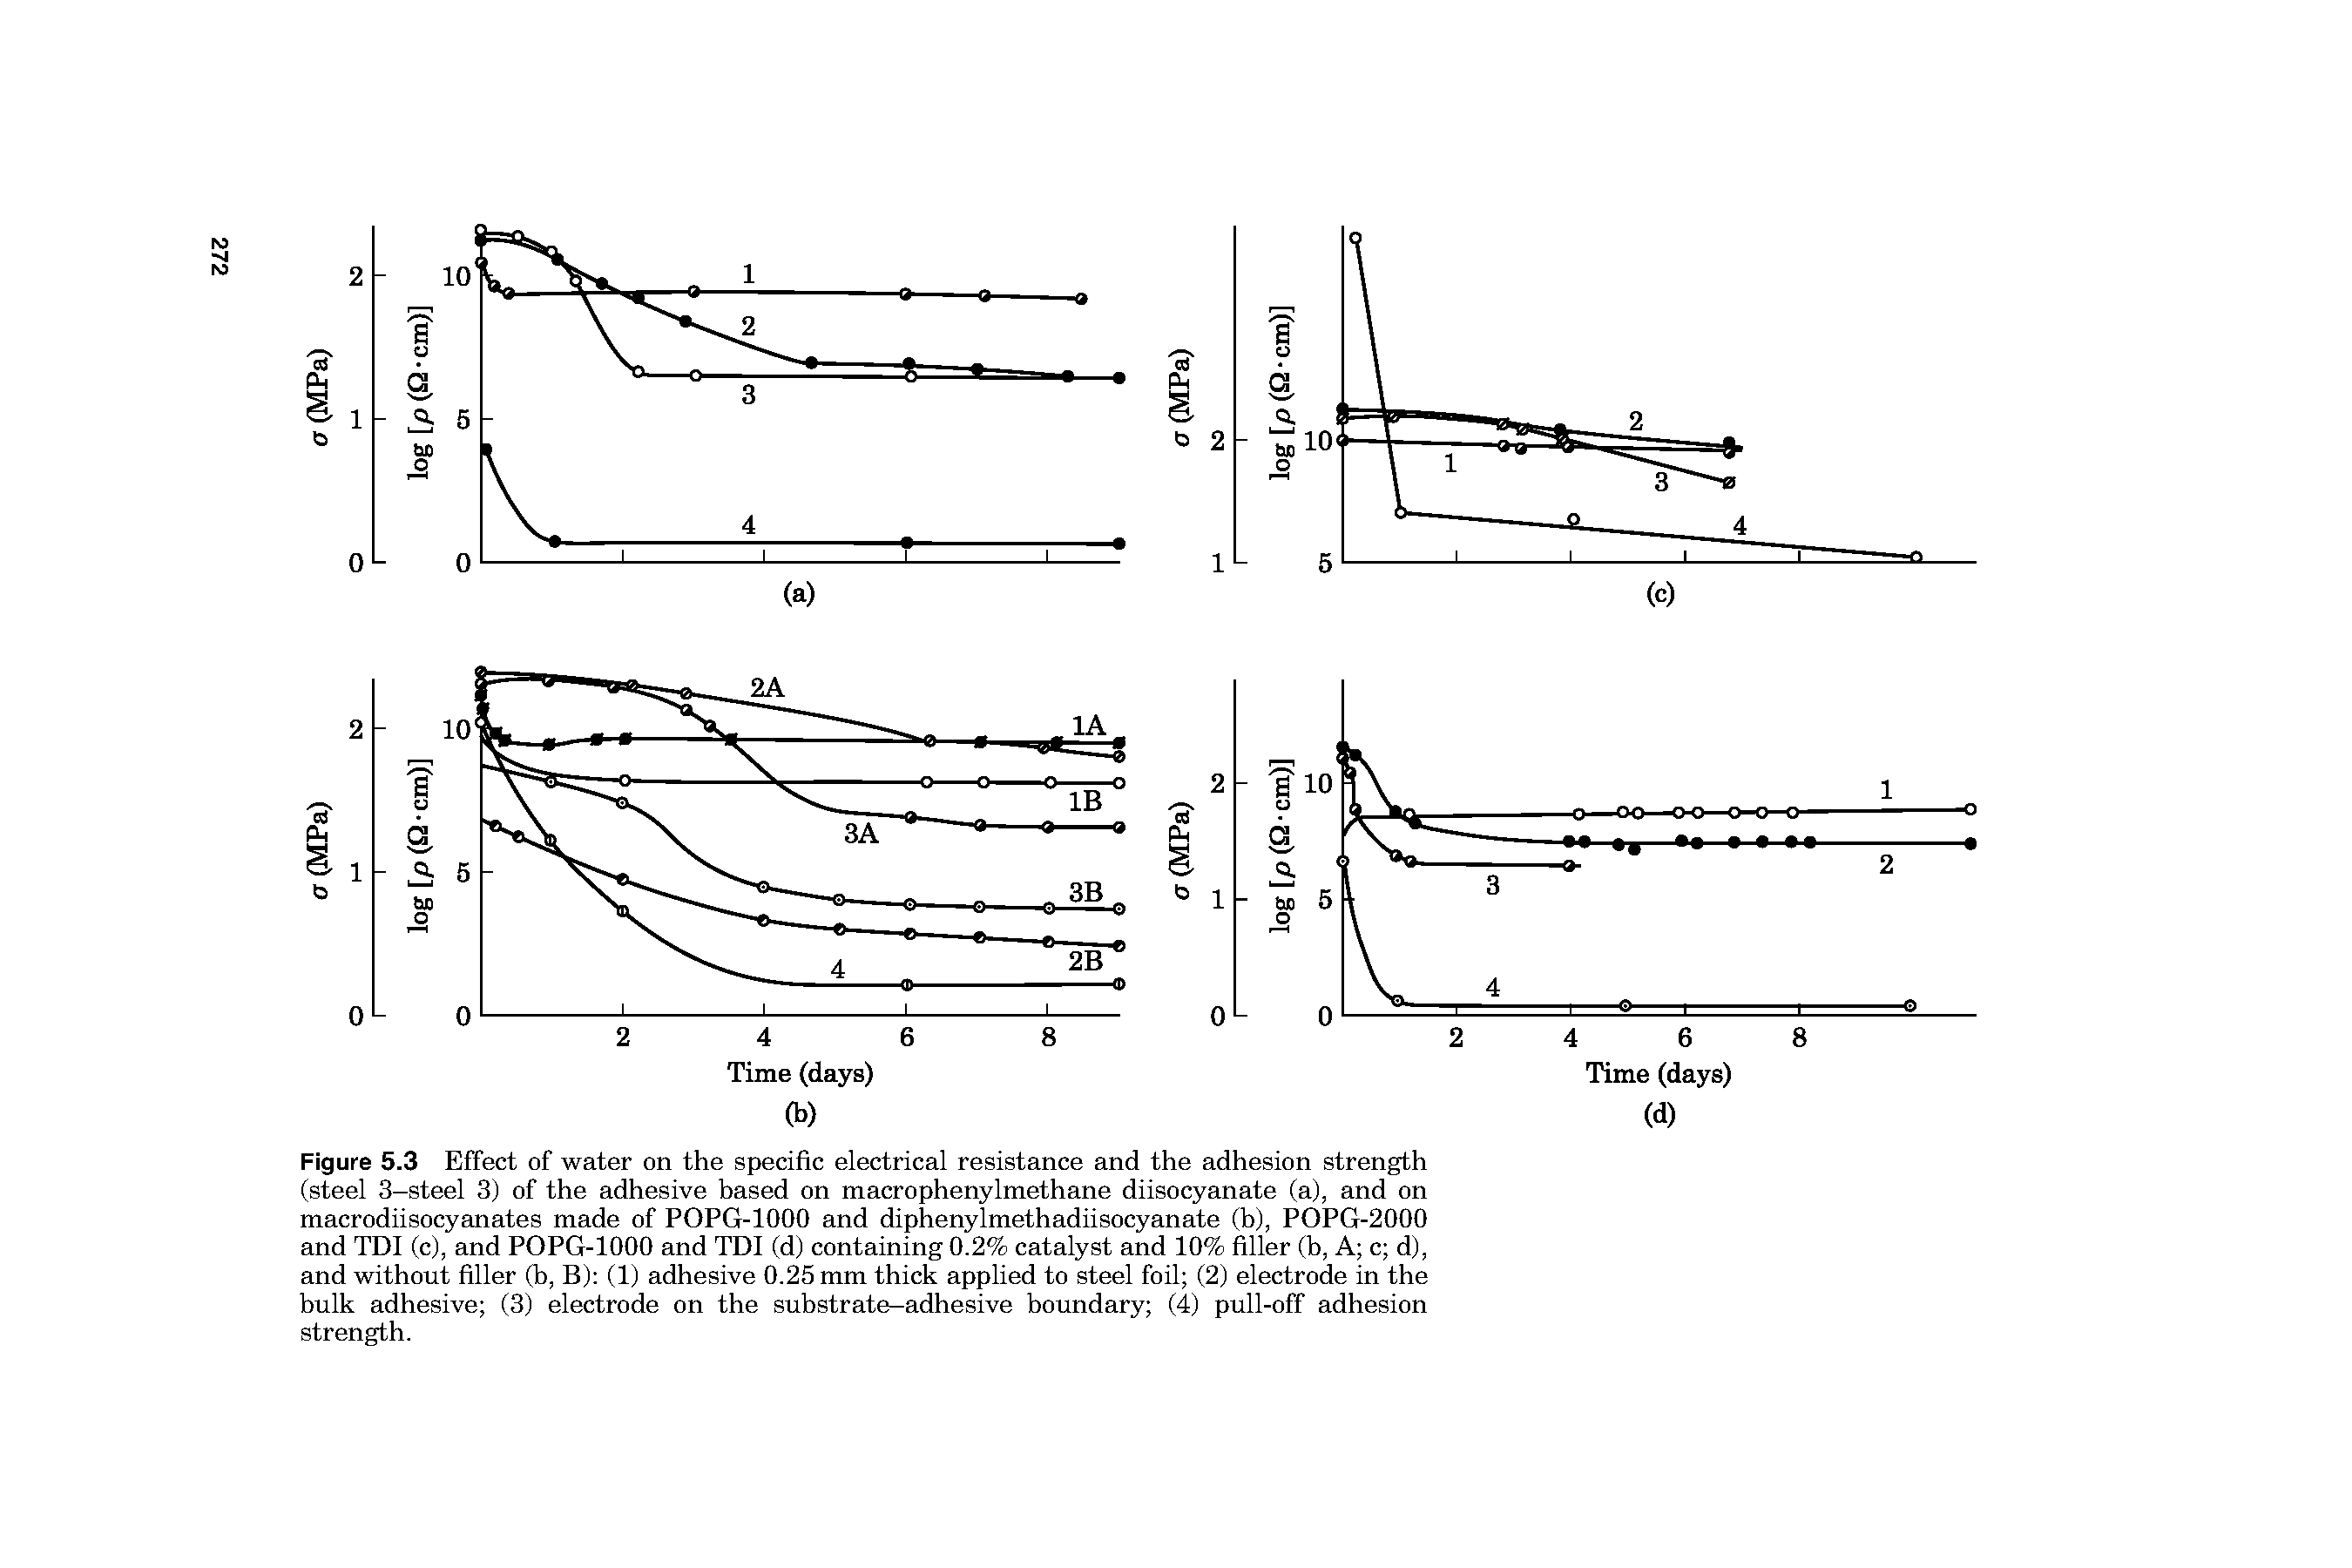 Figure 5.3 Effect of water on the specific electrical resistance and the adhesion strength (steel 3-steel 3) of the adhesive based on macrophenylmethane diisocyanate (a), and on macrodiisocyanates made of POPG-1000 and diphenylmethadiisocyanate (b), POPG-2000 and TDI (c), and POPG-1000 and TDI (d) containing 0.2% catalyst and 10% filler (b, A c d), and without filler (b, B) (1) adhesive 0.25 mm thick applied to steel foil (2) electrode in the bulk adhesive (3) electrode on the substrate-adhesive boundary (4) pull-off adhesion strength.